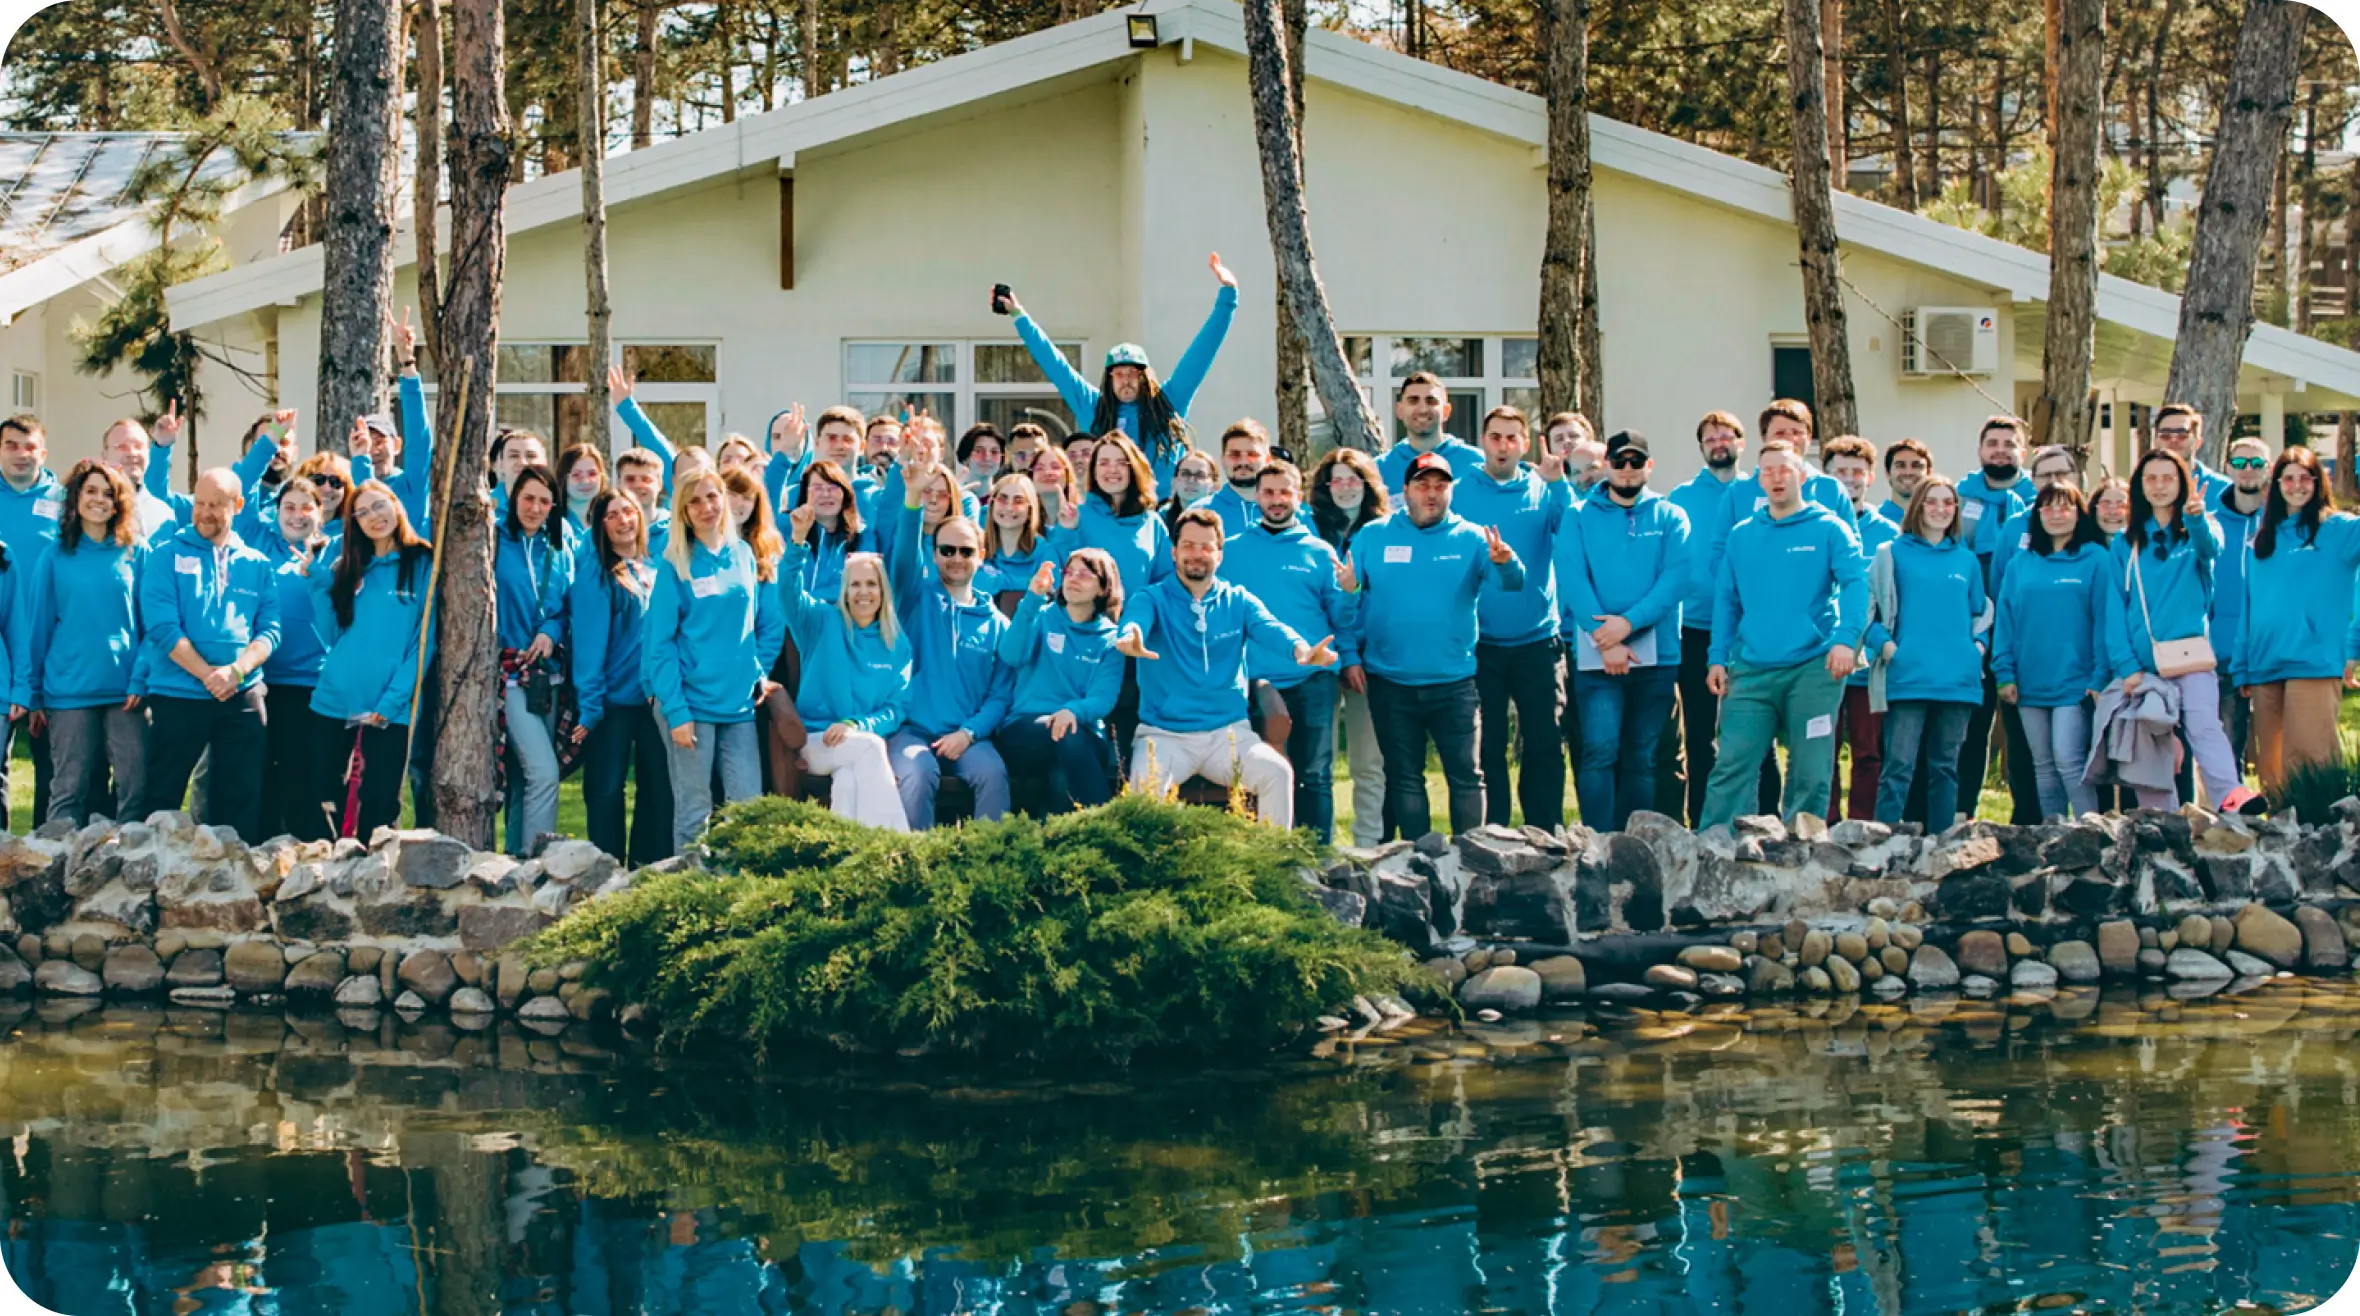 Group of people in blue shirts posing cheerfully by a pond in front of cabins at a daytime outdoor gathering, "New About Us" featured prominently on their attire.